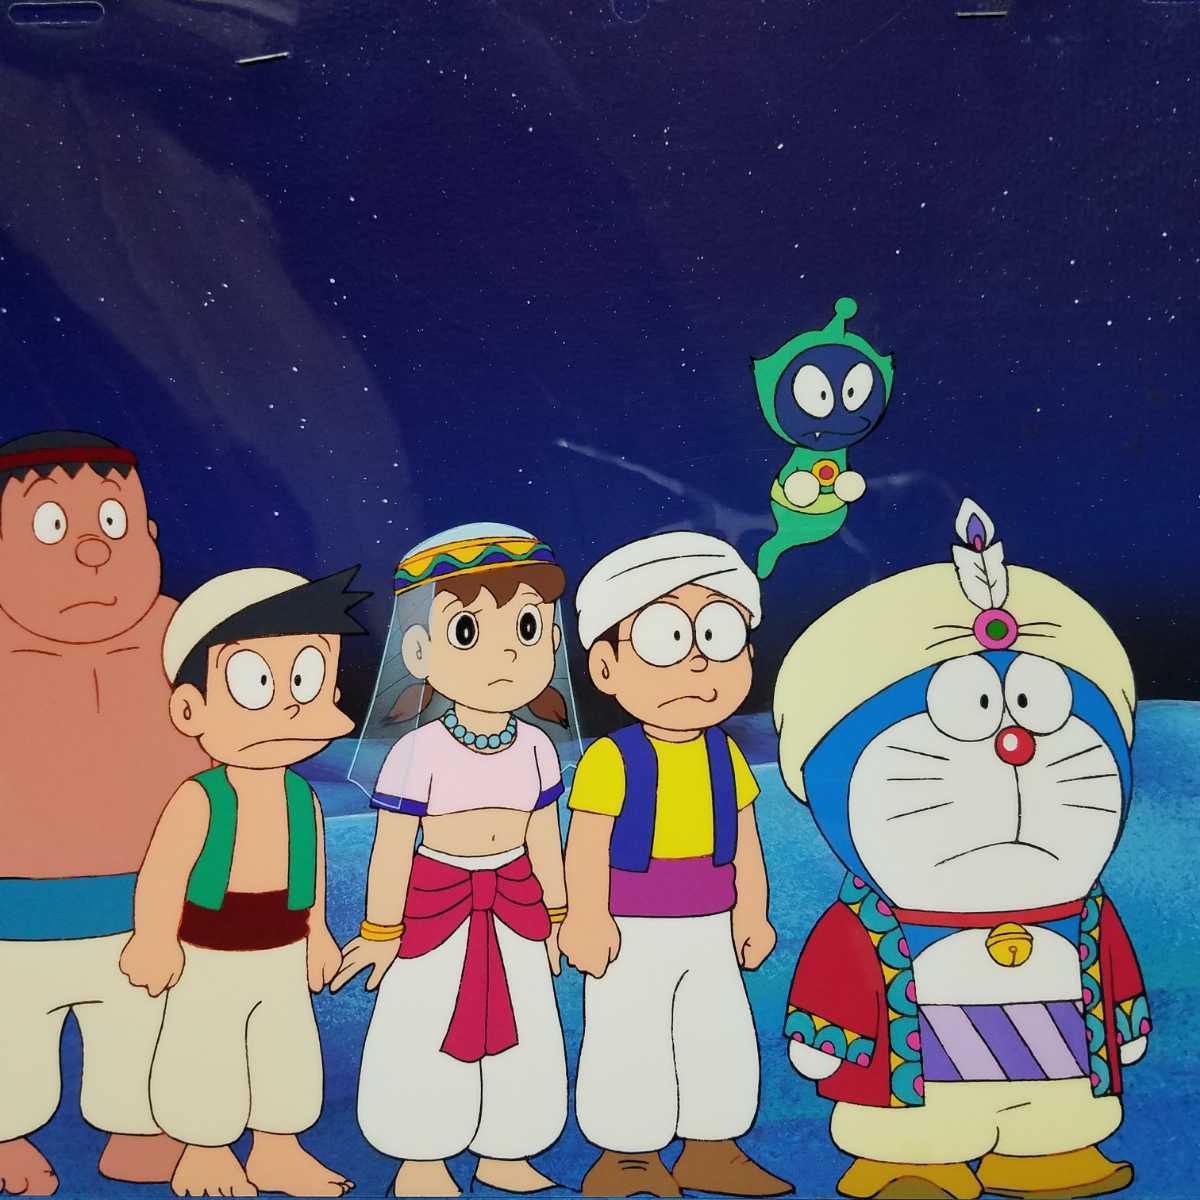 # elected goods # Doraemon # cell picture # movie Doraemon extension futoshi. gong bi Anna ito# wistaria .*F* un- two male # anime, rare, not for sale, anime, manga #ad